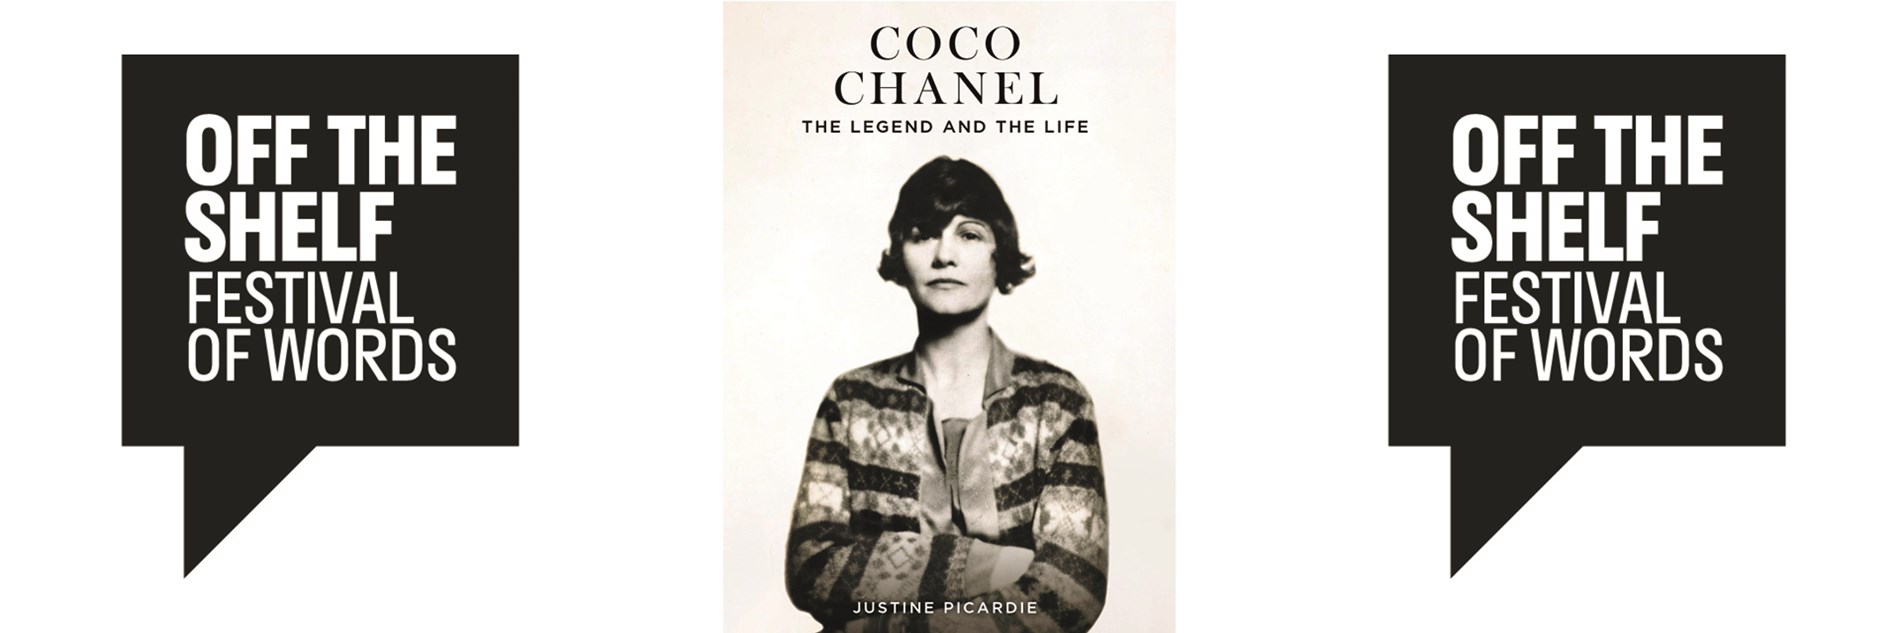 Off the Shelf: Coco Chanel: The Legend and the Life – Justine